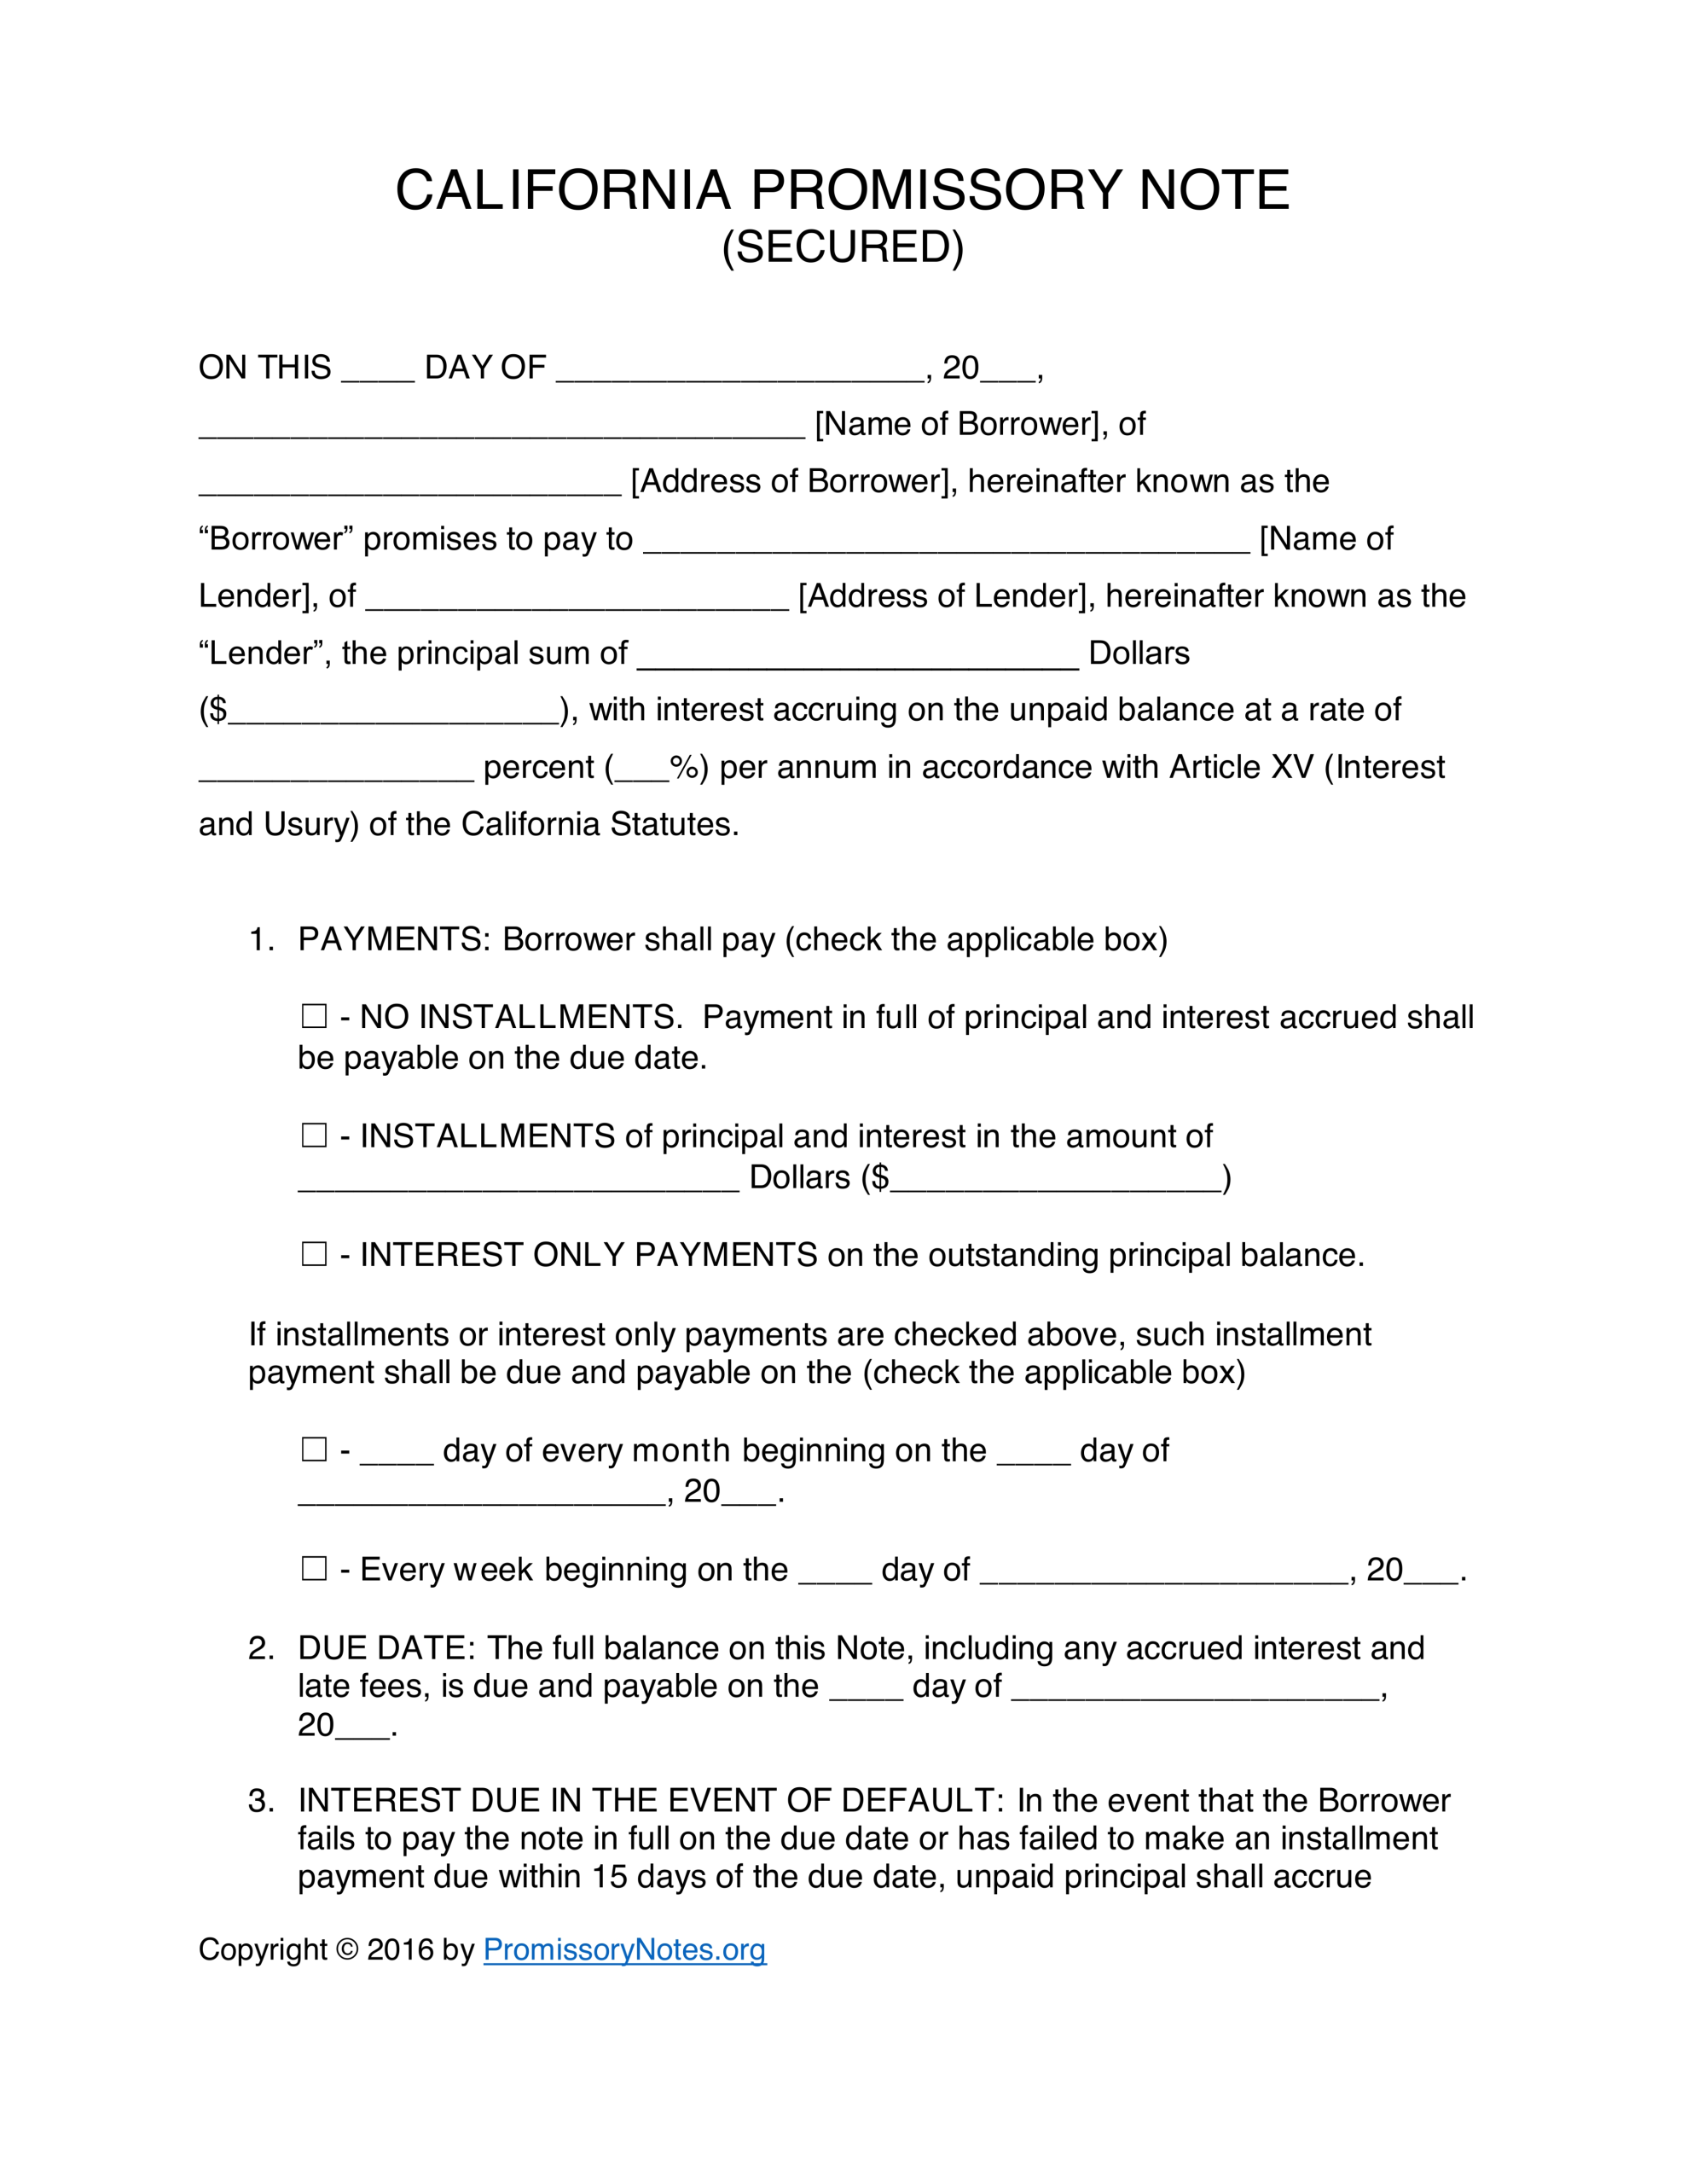 Free California Promissory Note Form Template pertaining to Promissory Note California Template